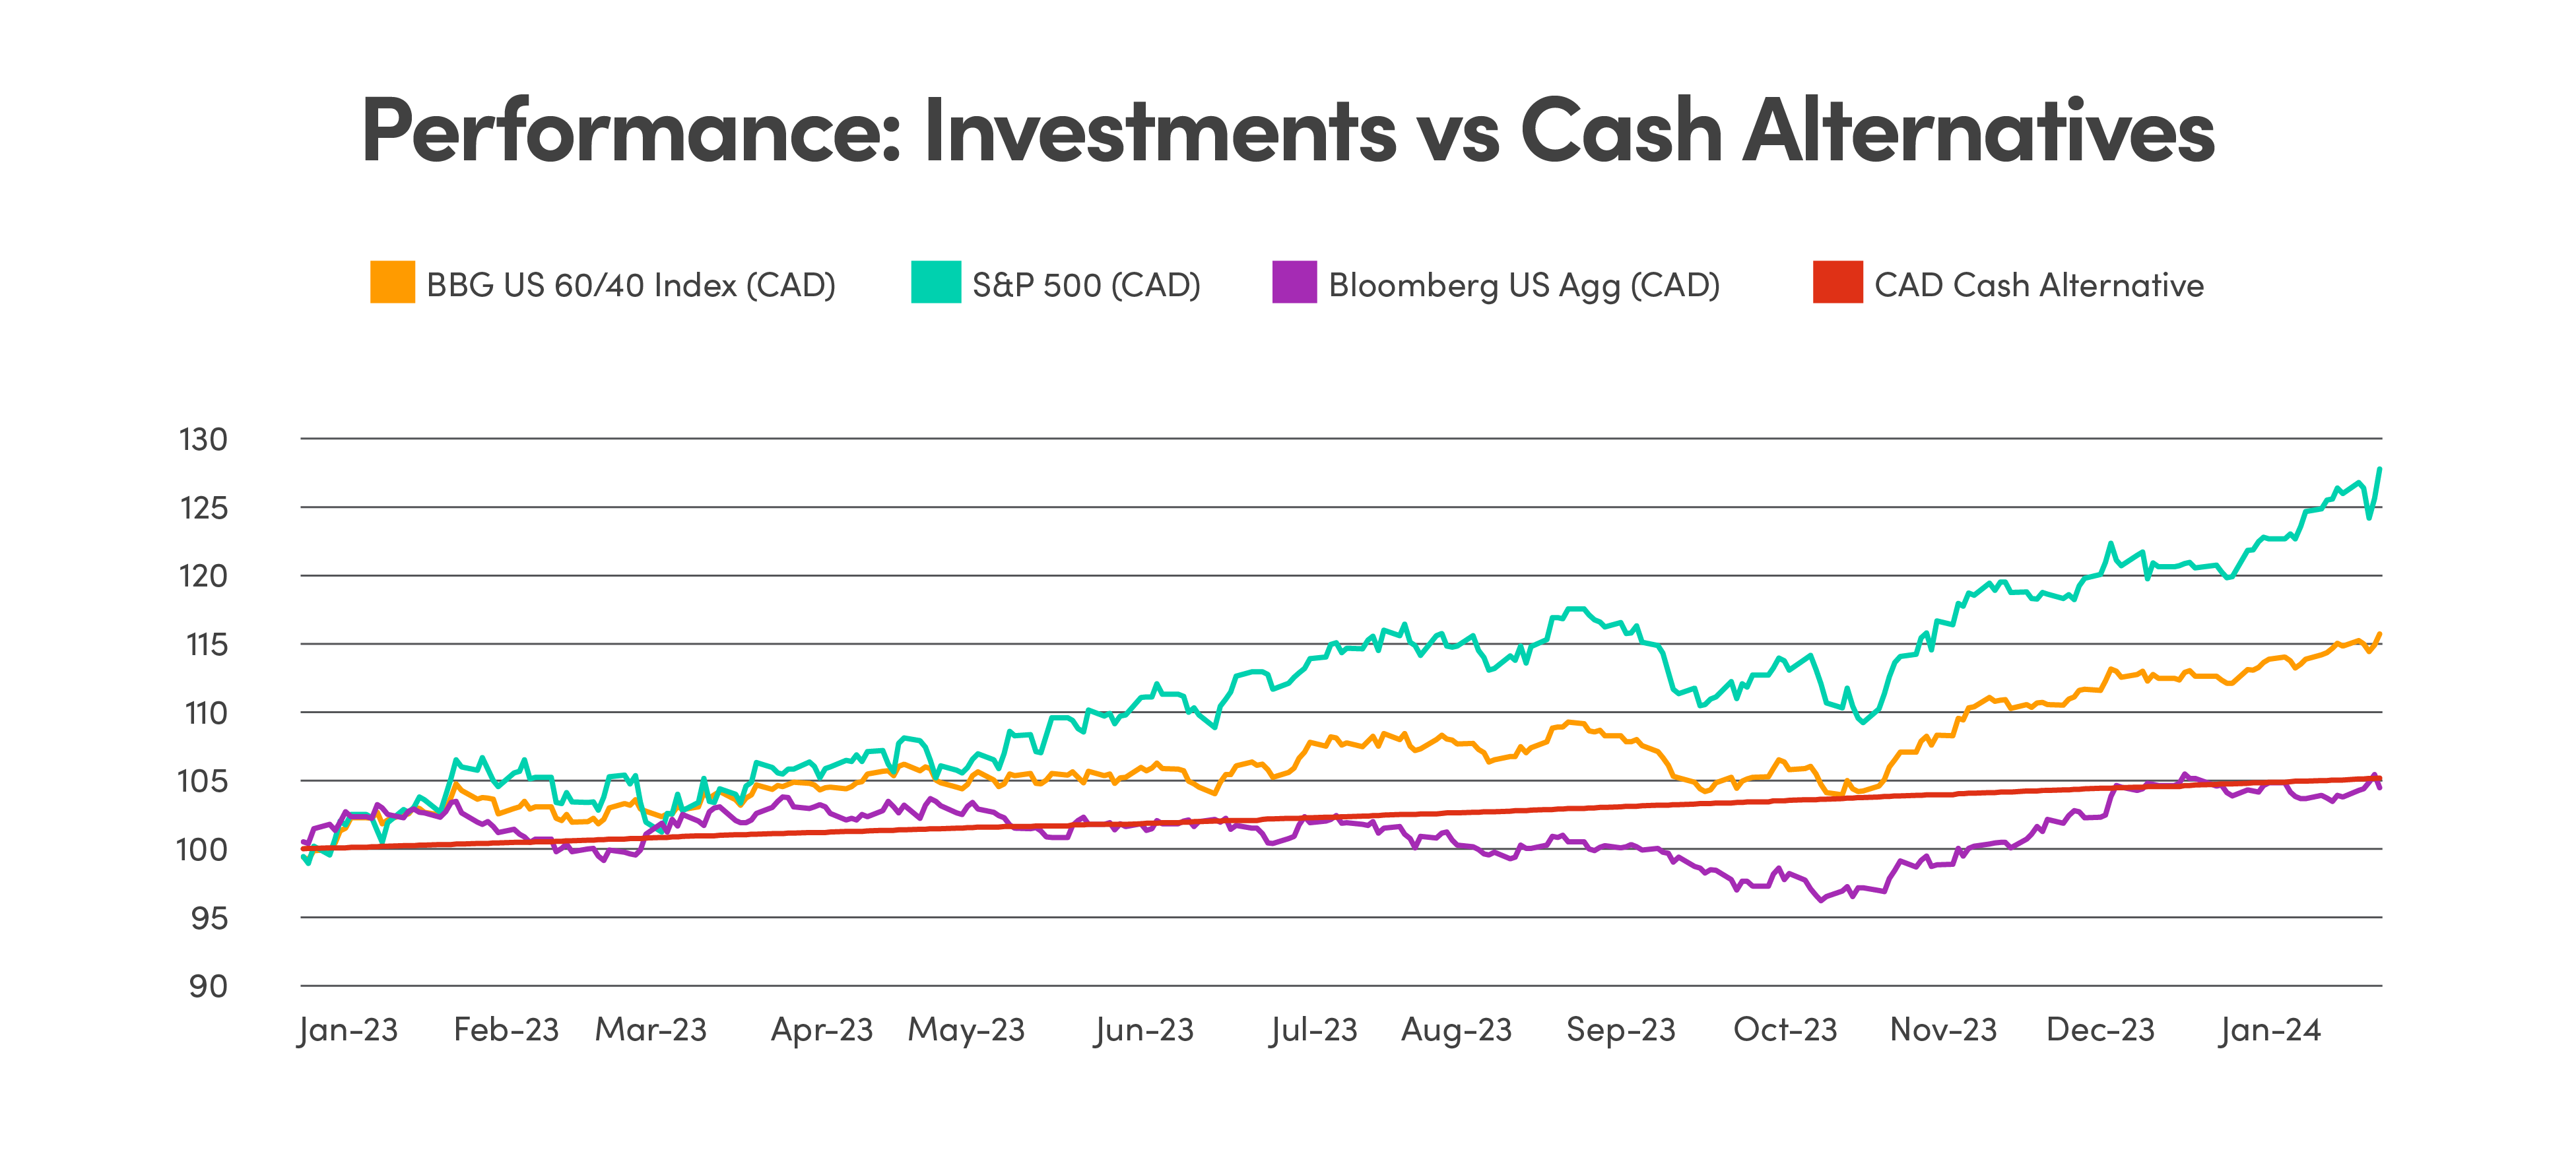 Line graph comparing performance of BBG US 60/40 Index (CAD), S&P 500 (CAD), Bloomberg US Agg (CAD) and CAD Cash Alternative from Jan 2023 to Jan 2024